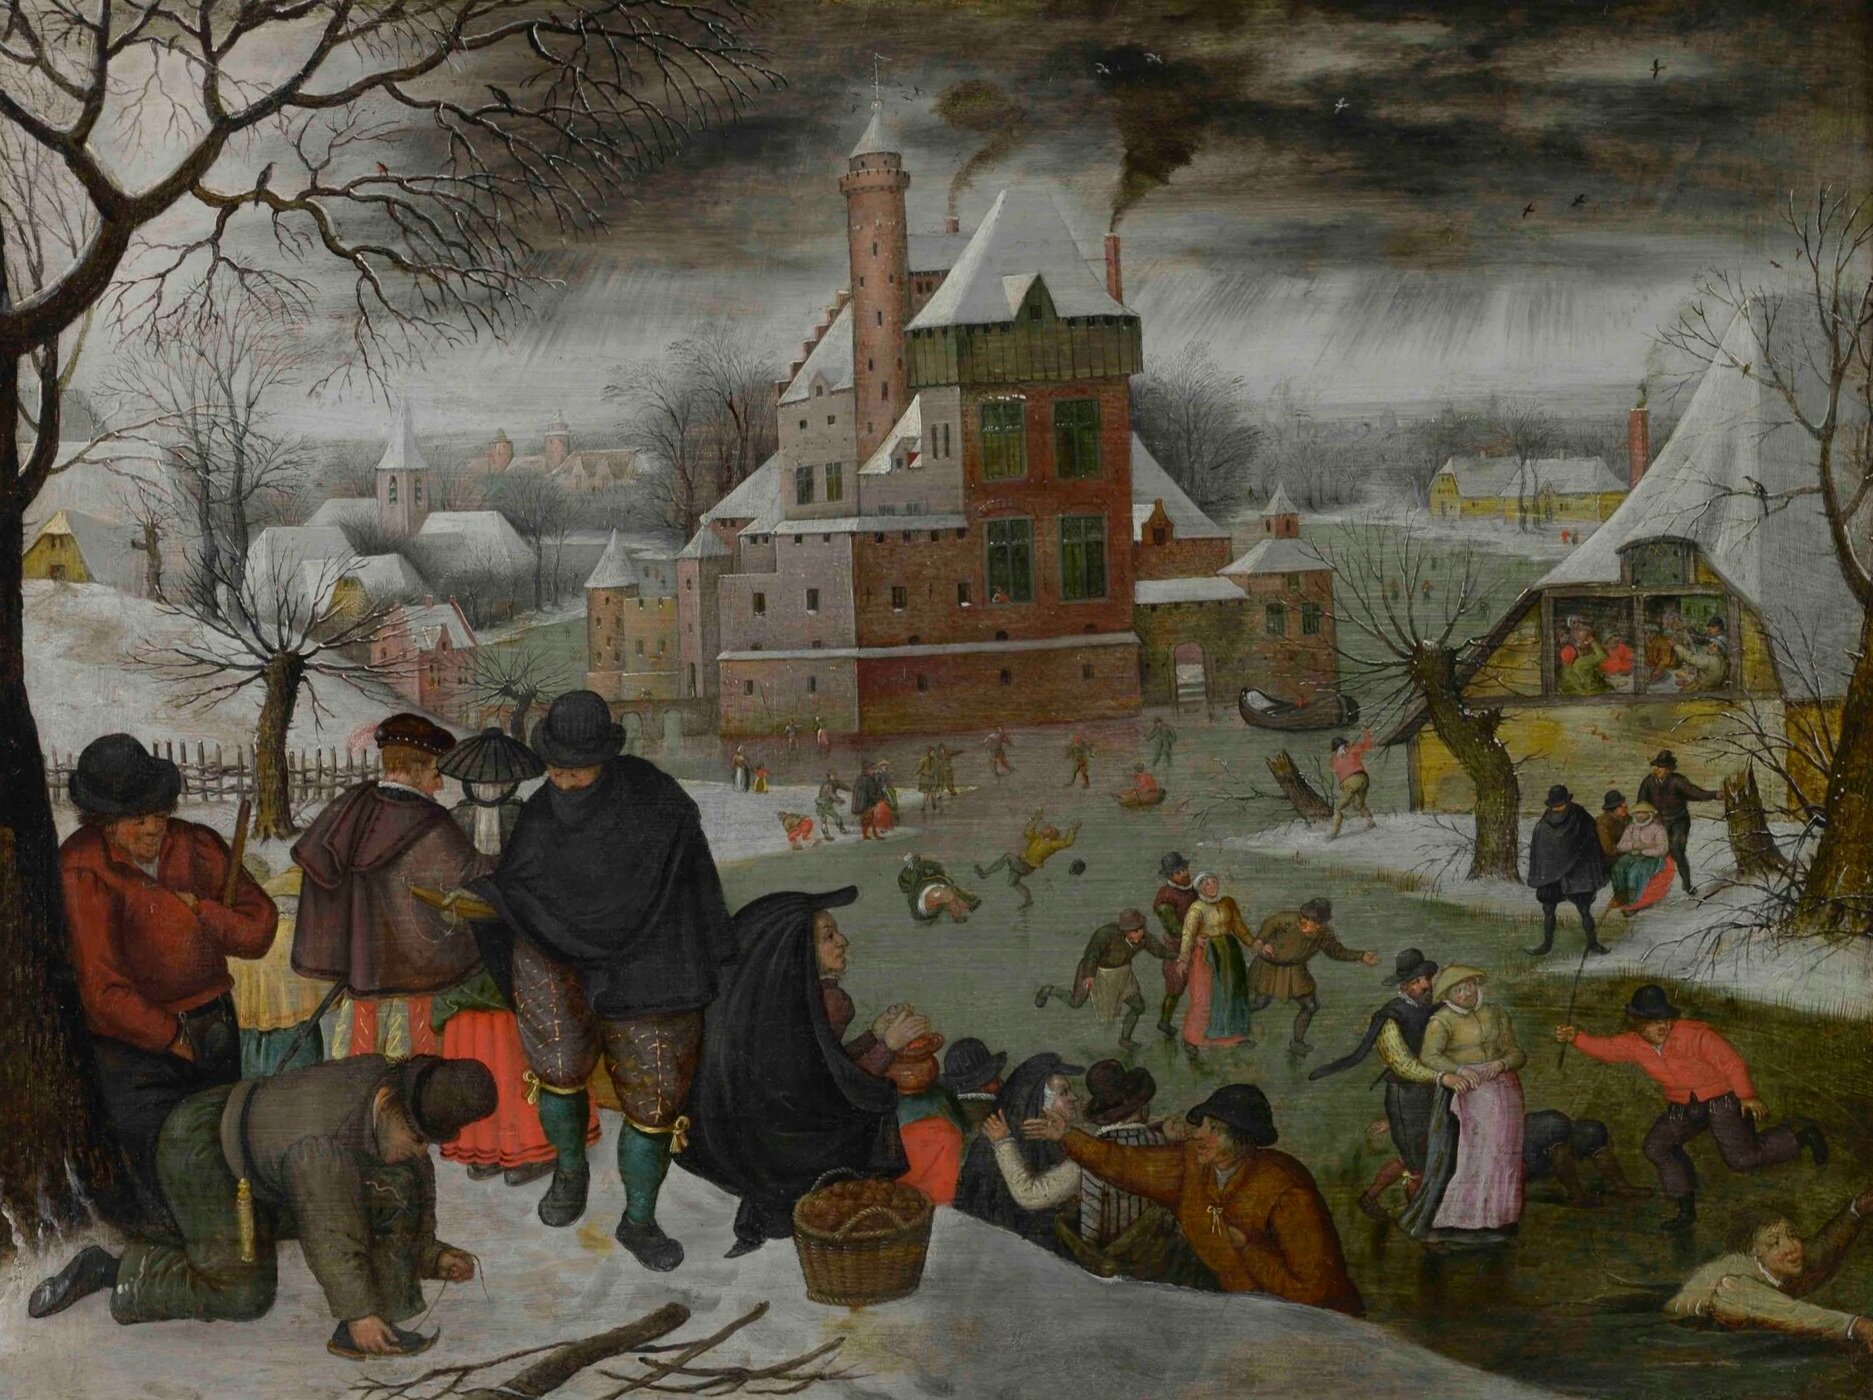 Episode 3 - ‘Winter’ by Peter Brueghel the Younger